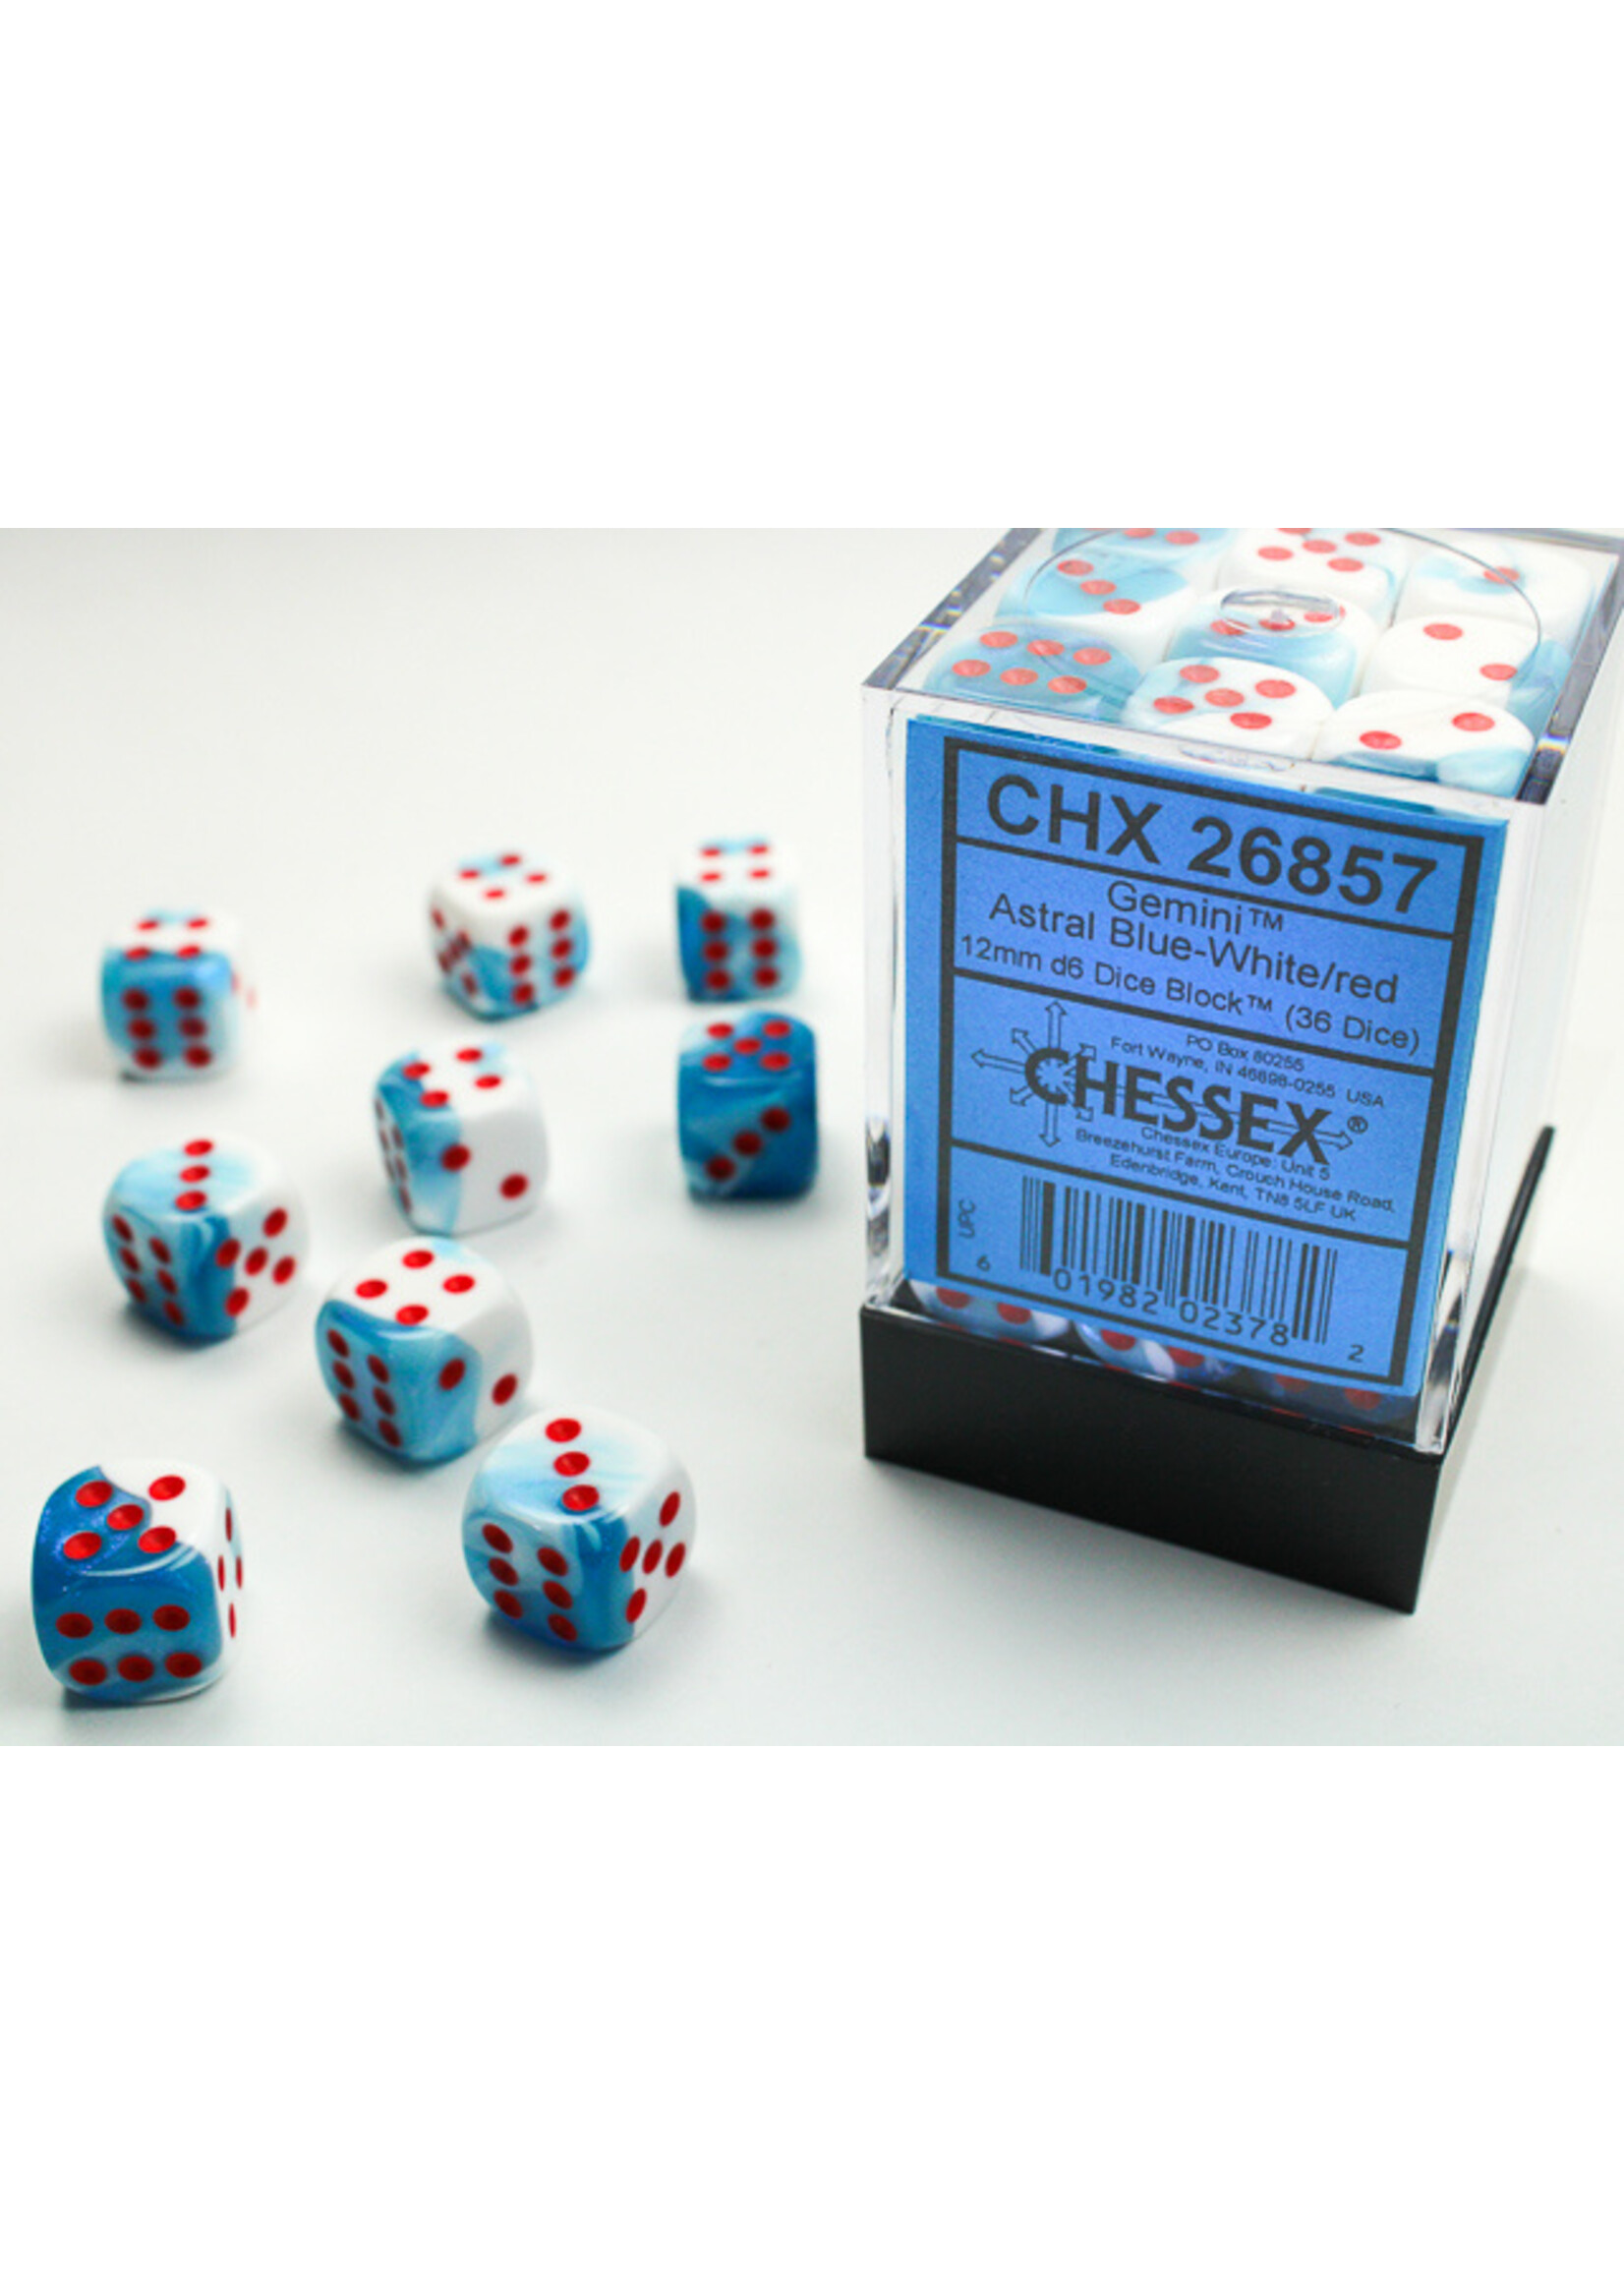 Chessex GMNI 36d6 astral blue-white/red